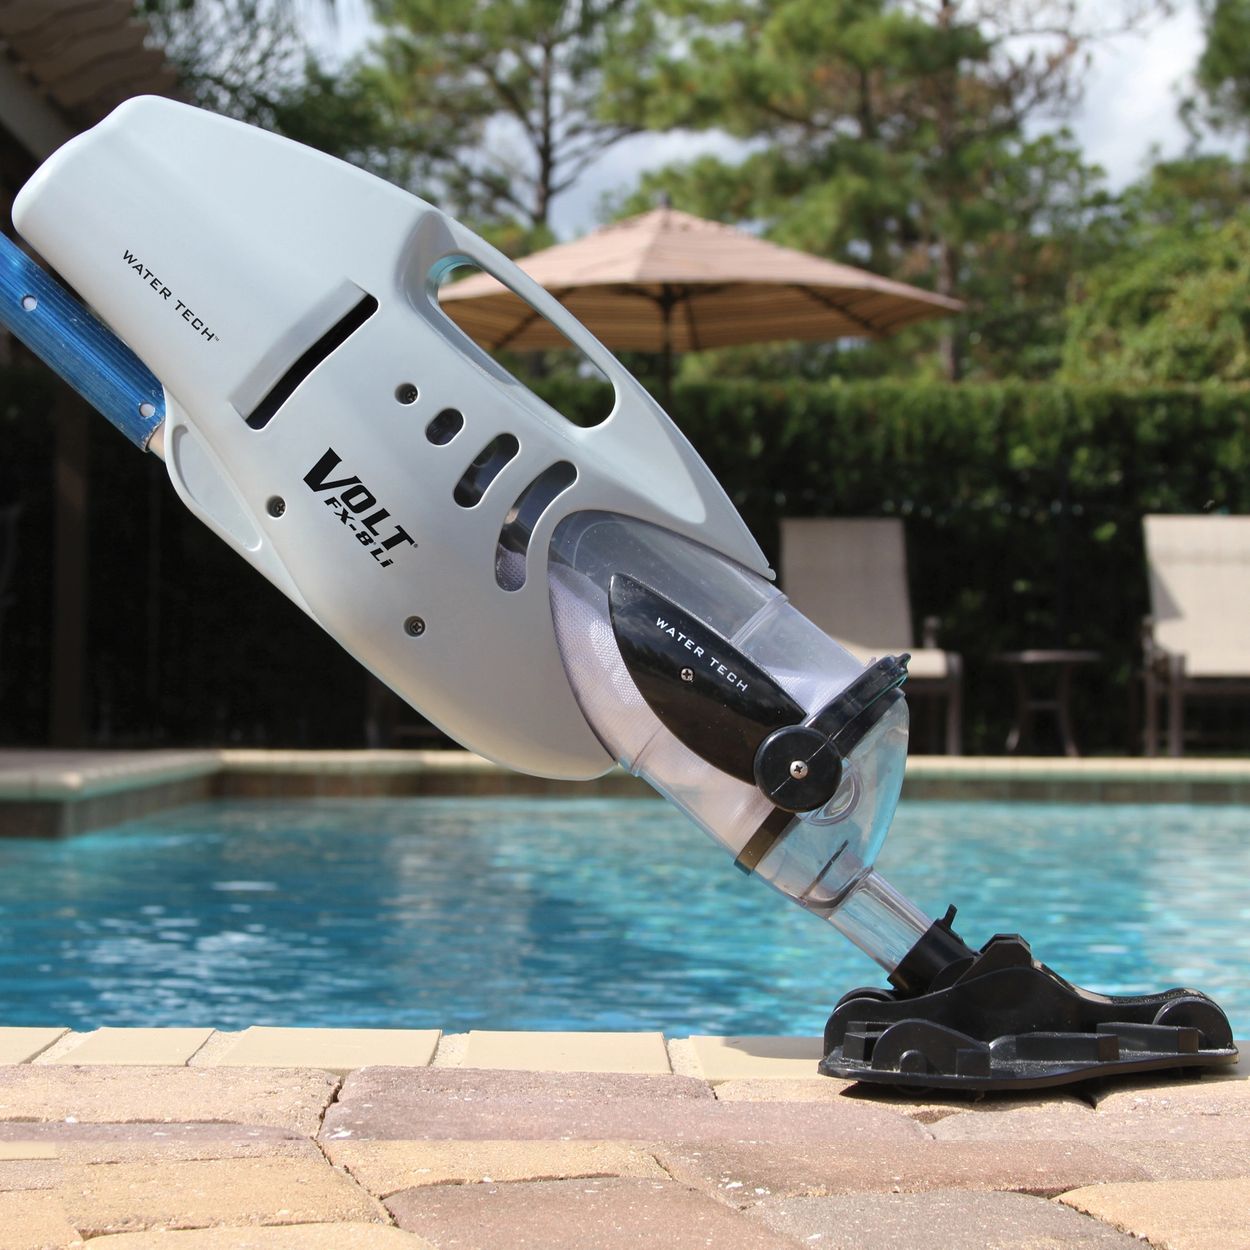 Water Tech Volt FX-8Li
Powerful Suction So You Can Clean Your Pool In Minutes
